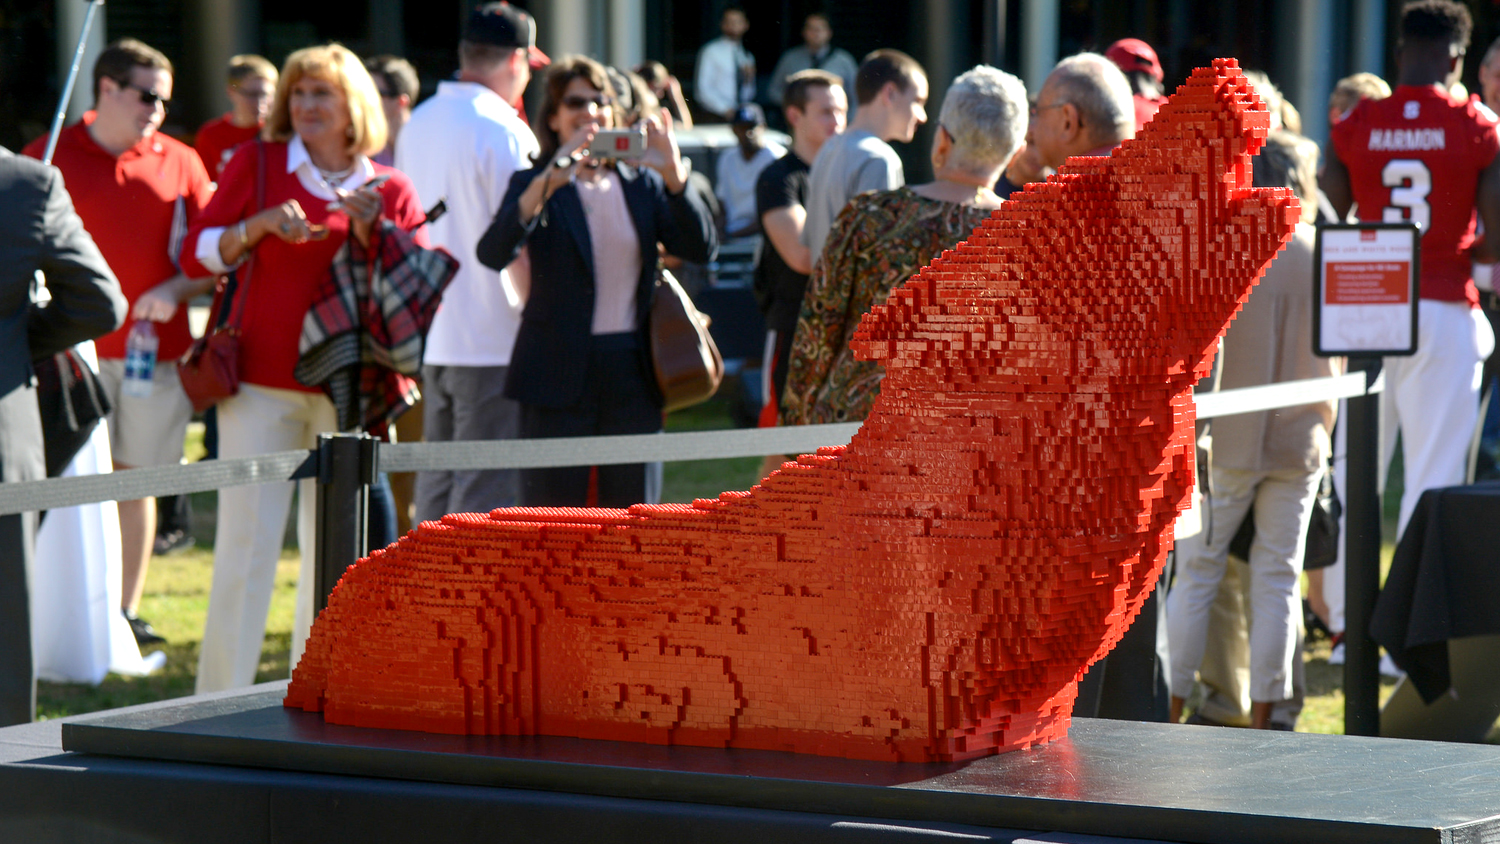 Image of howling wolf sculpture made of legos